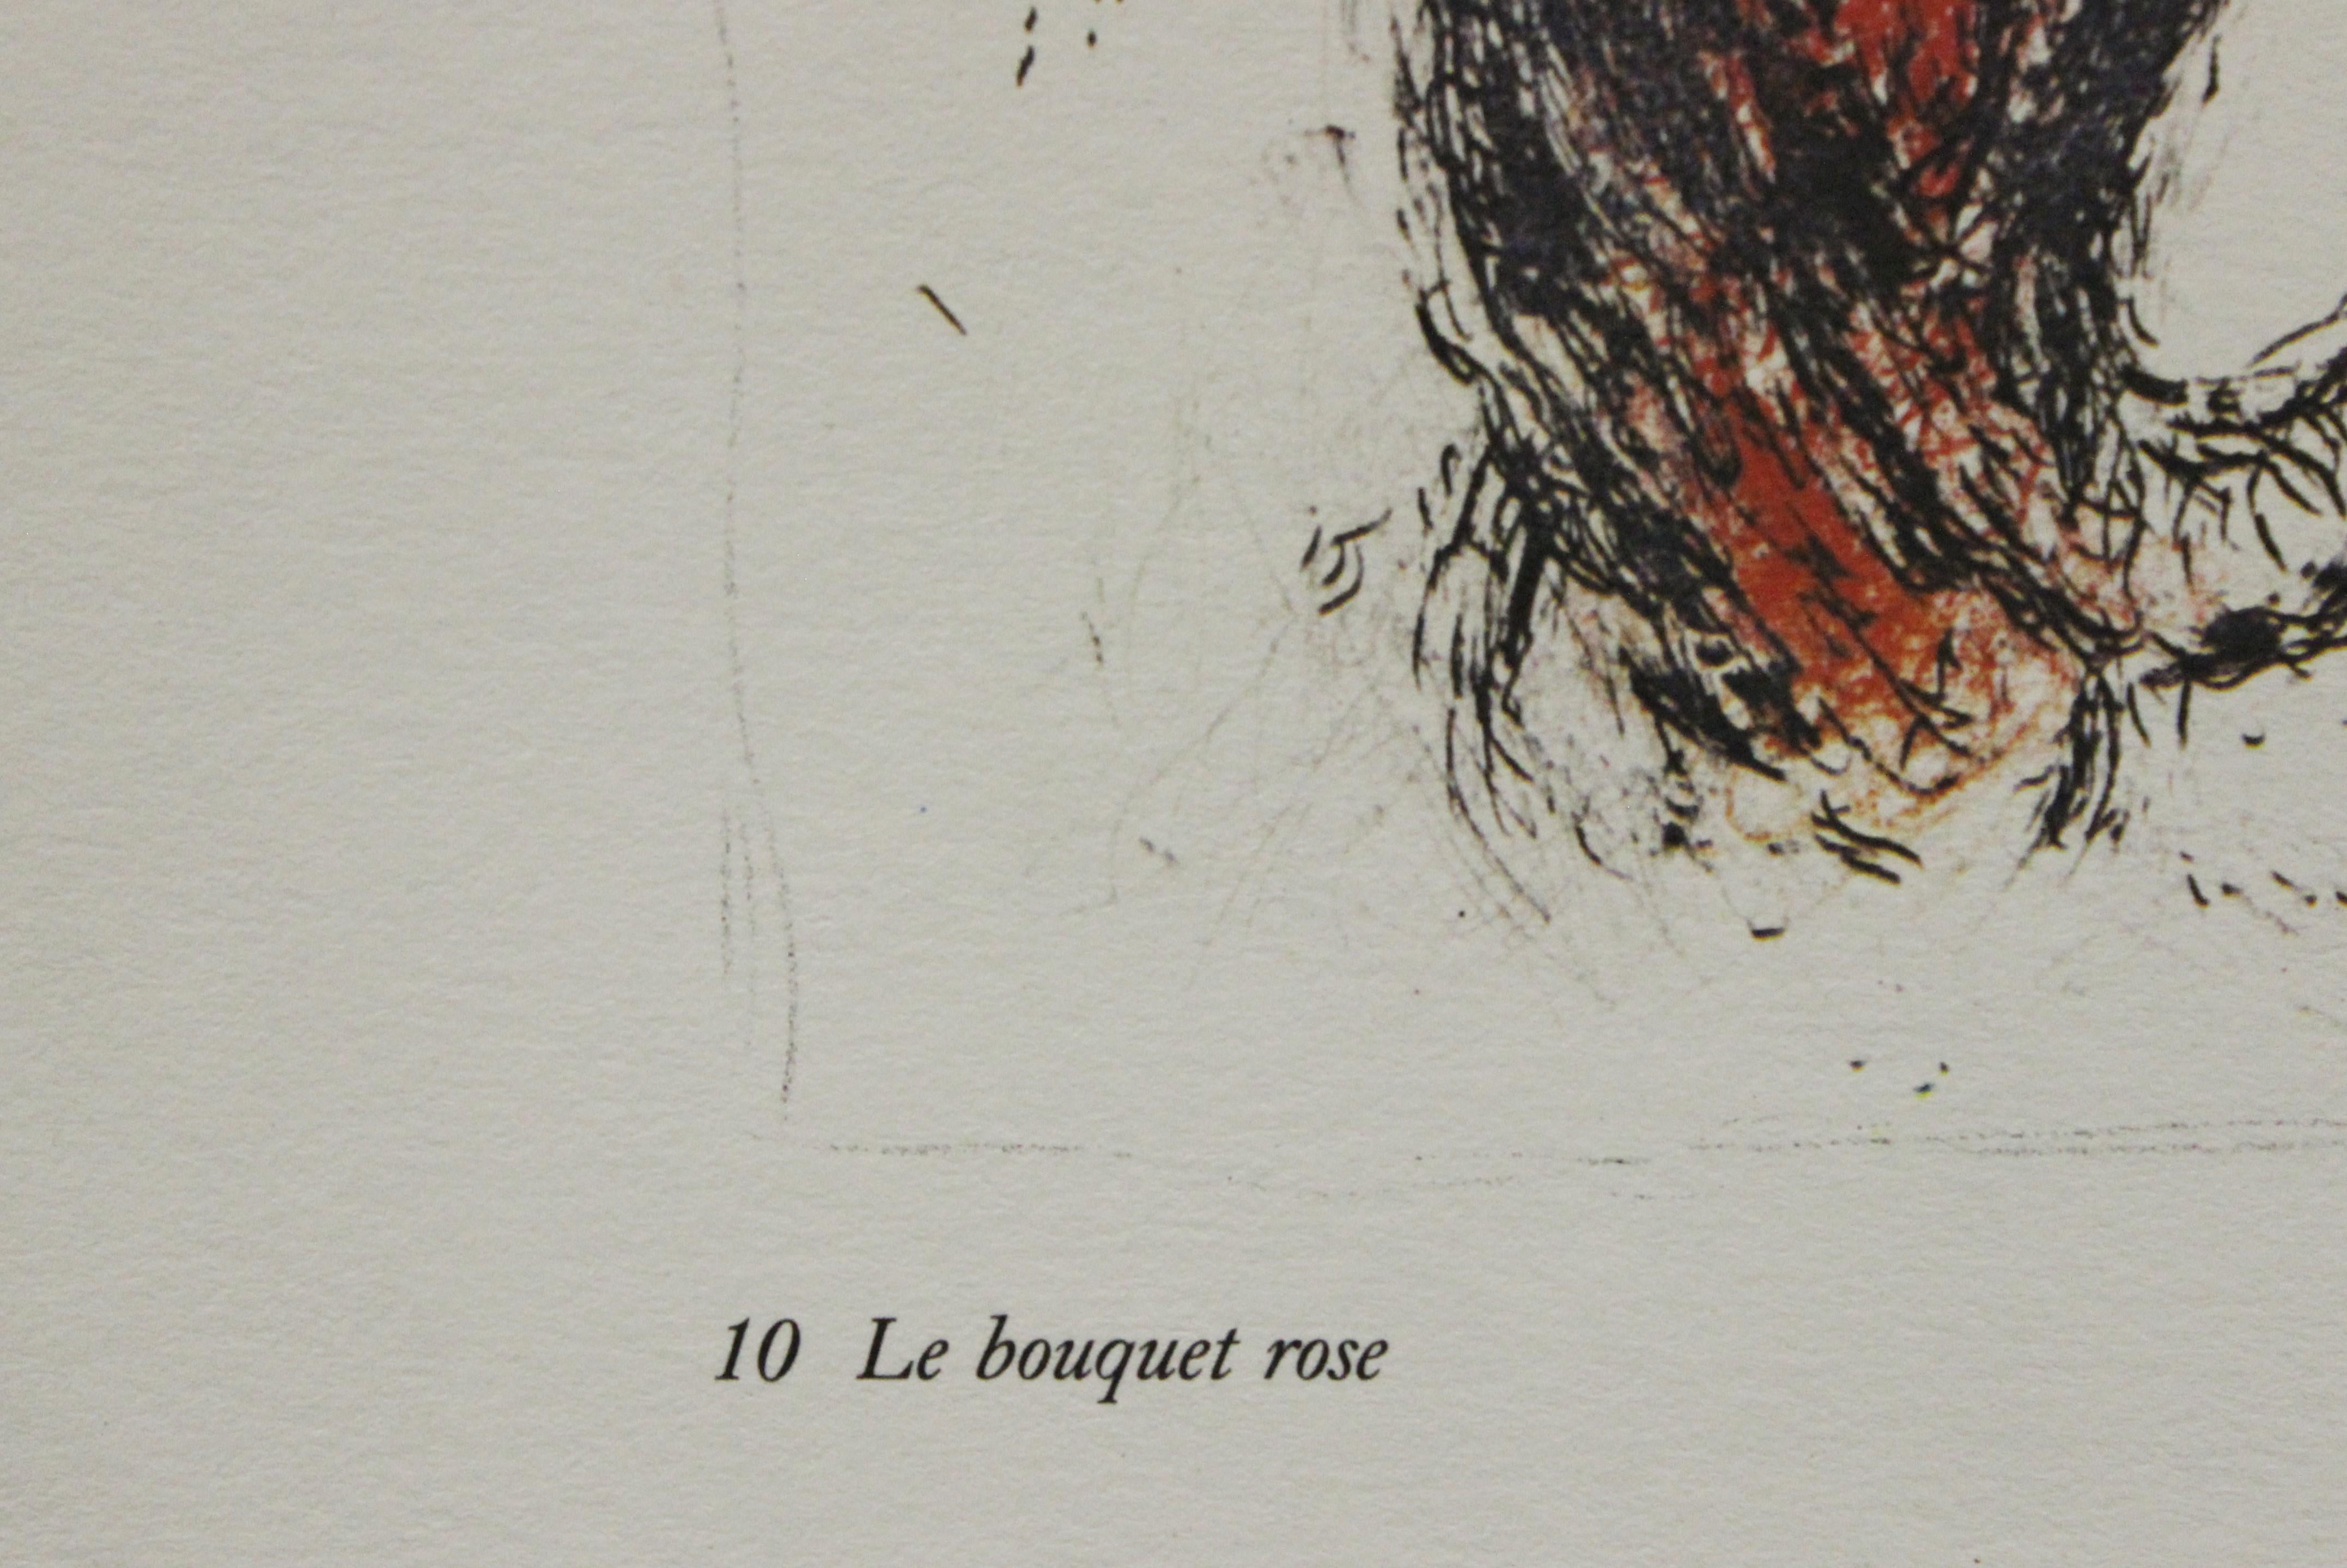 Maternite Rouge & Le Bouquet Rose: Lithographs from Derriere Le Miroir - Print by Marc Chagall